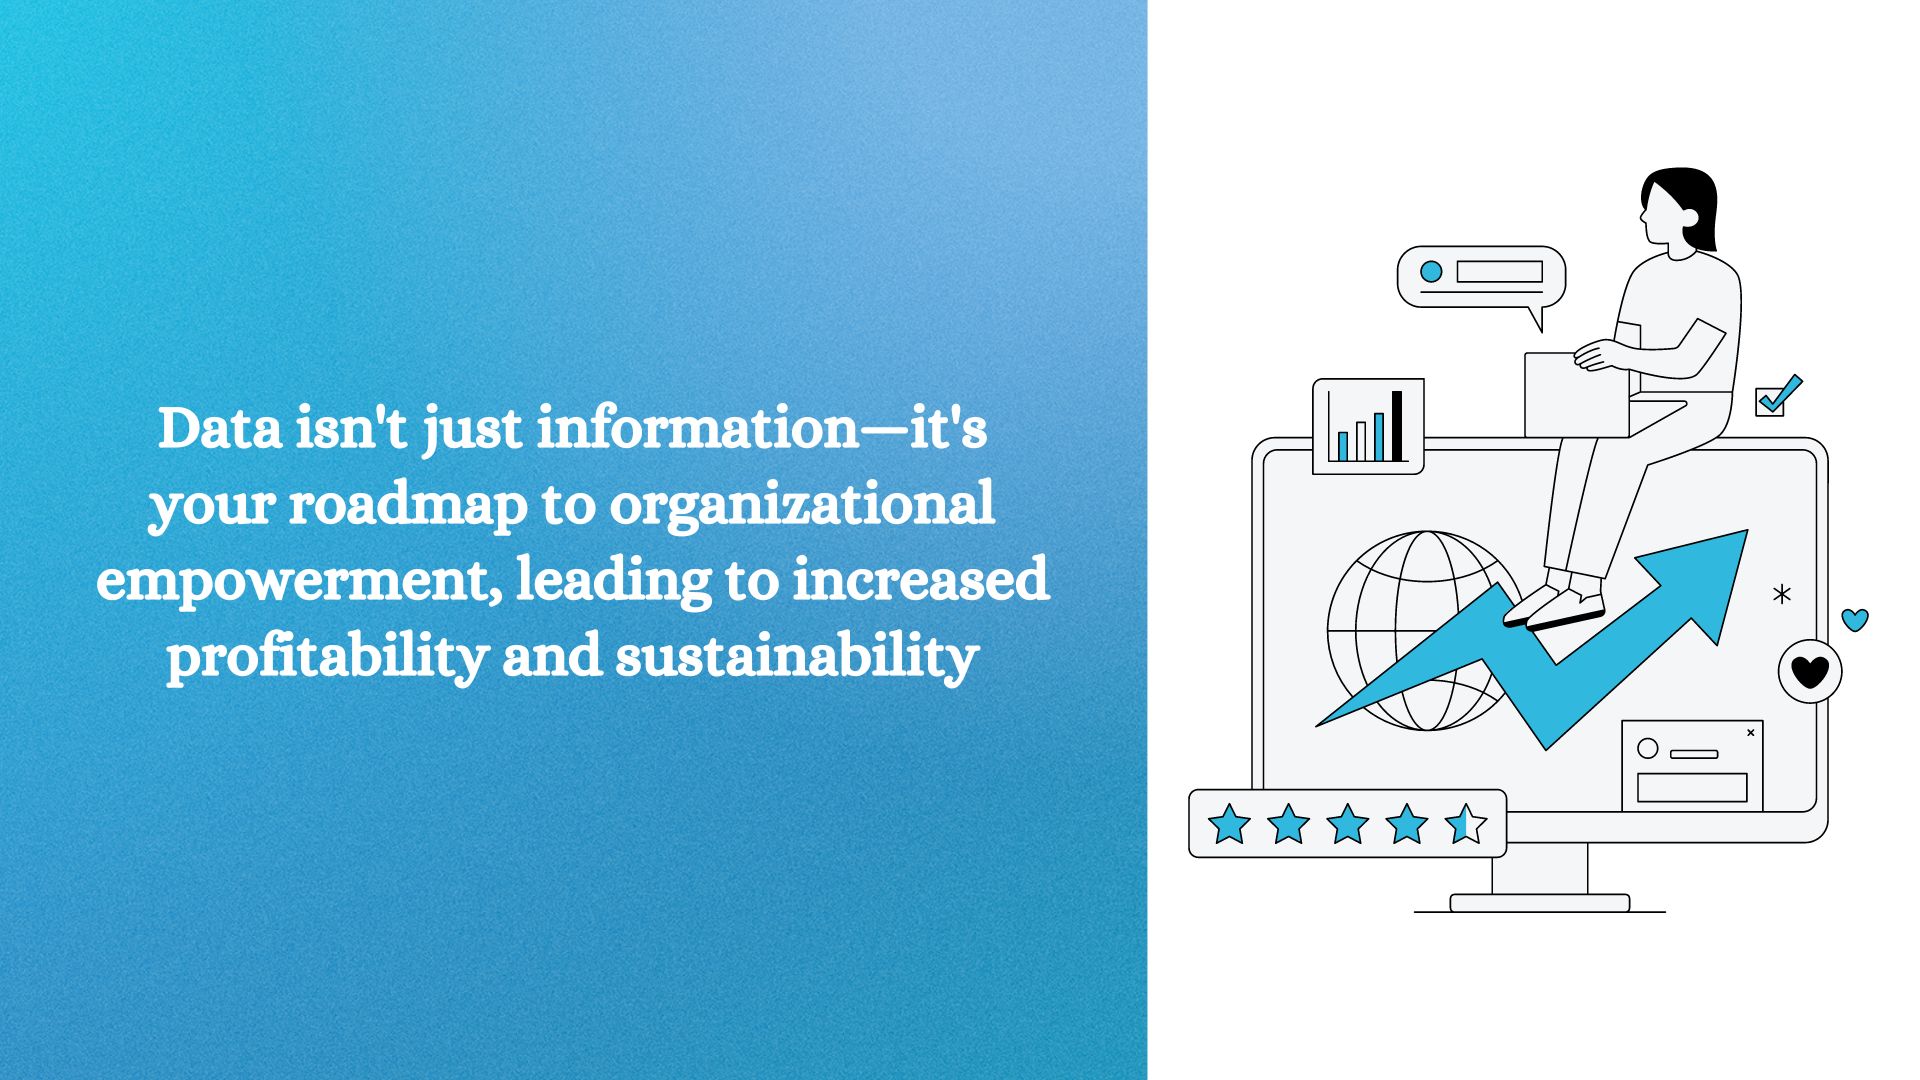 Data isn't just information—it's your roadmap to organizational empowerment, leading to increased profitability and sustainability